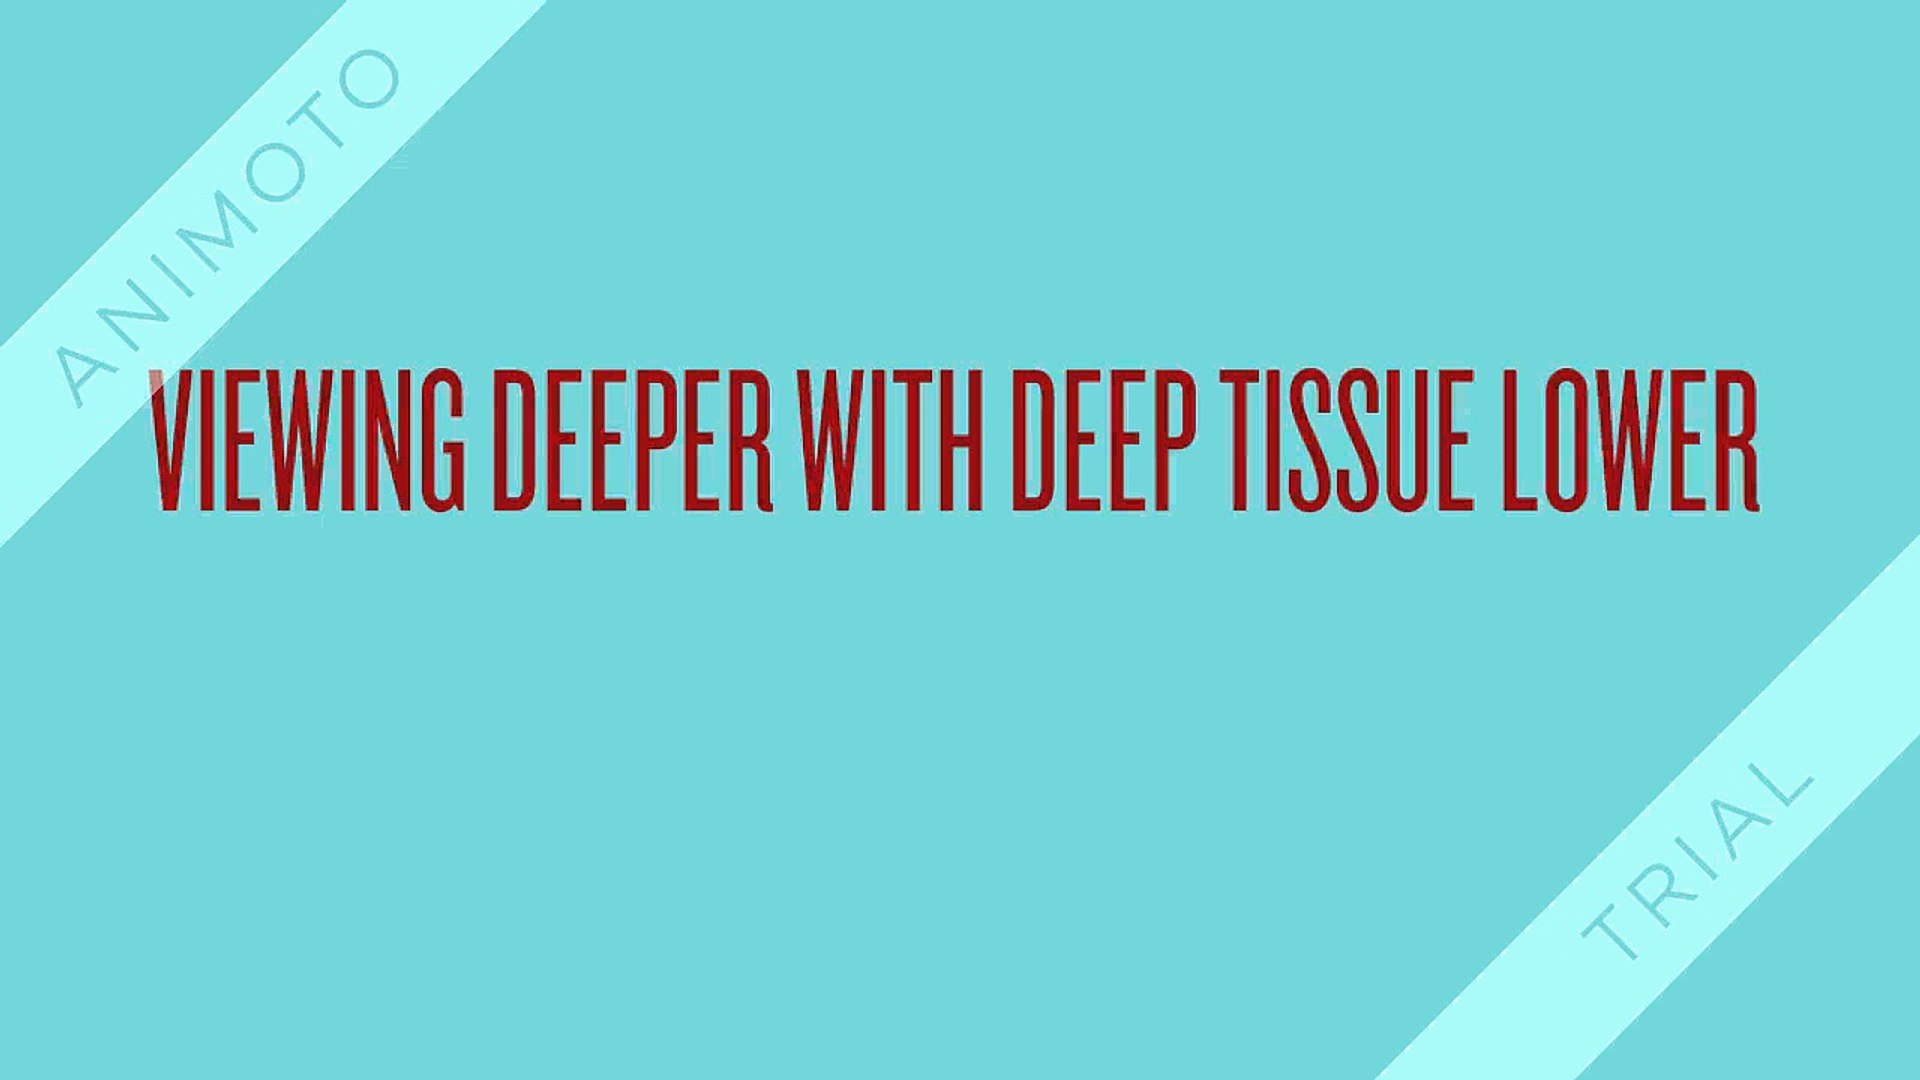 Viewing Deeper with Deep Tissue Lower